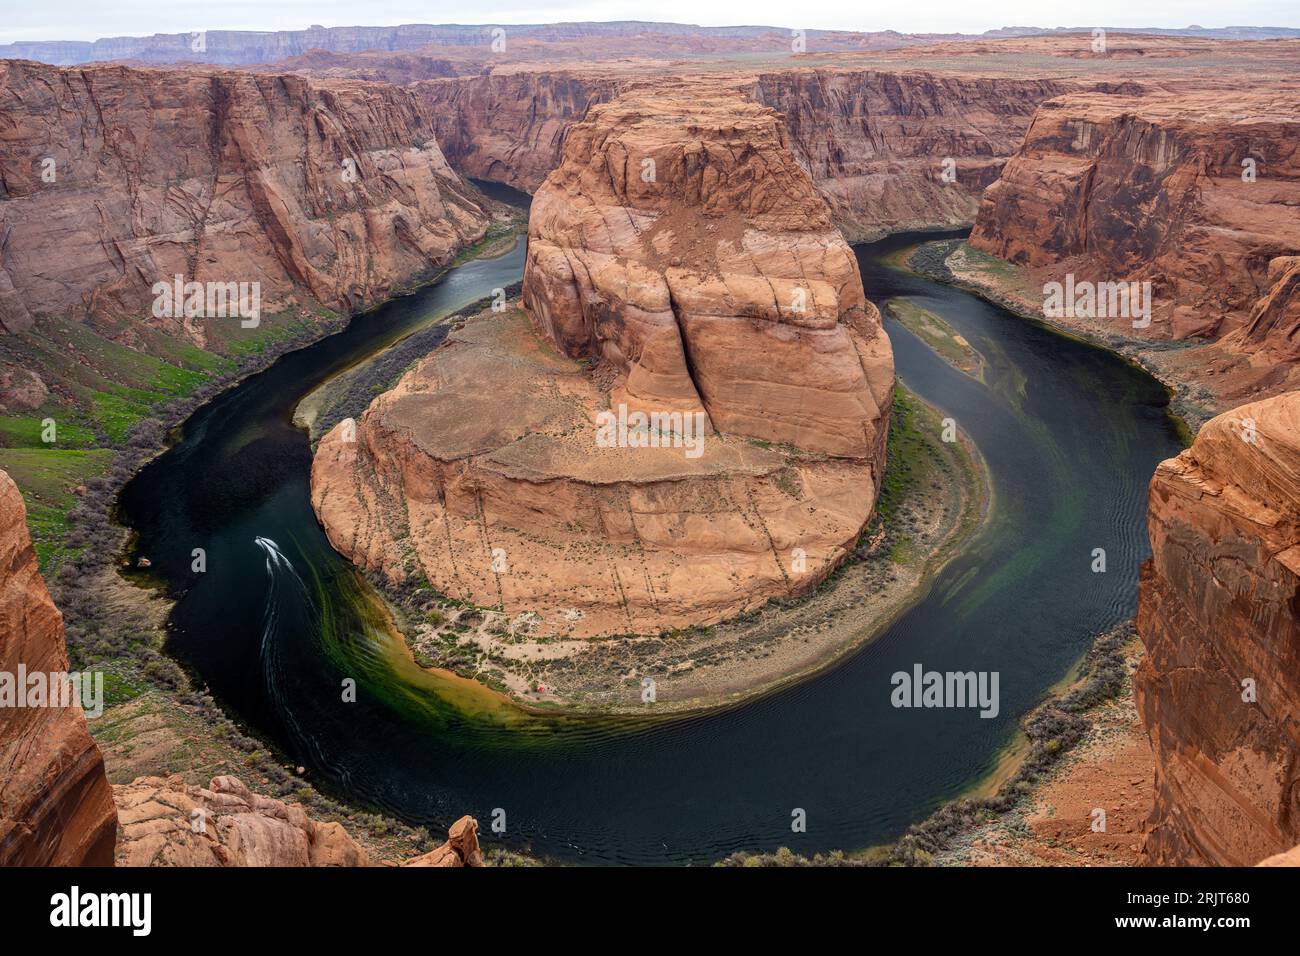 The famous Horseshoe Bend of the Colorado river in northern Arizona, United States Stock Photo